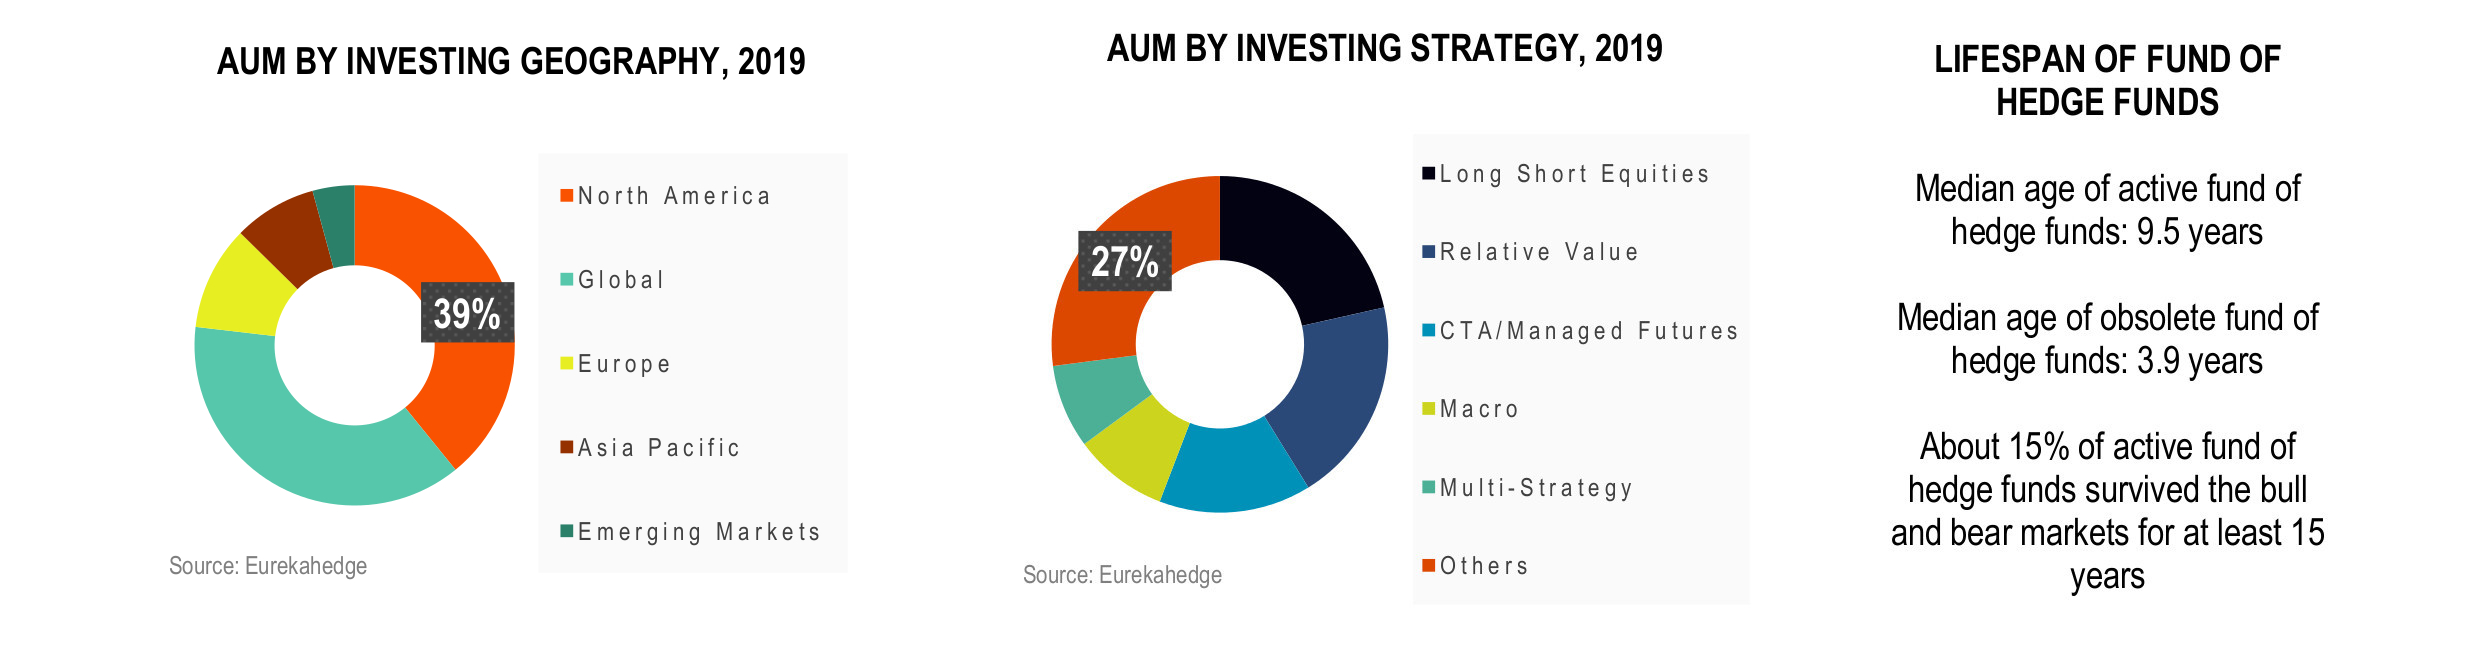 Funds of Hedge Funds Infographic April 2019 - AUM by investing geography and strategy 2019